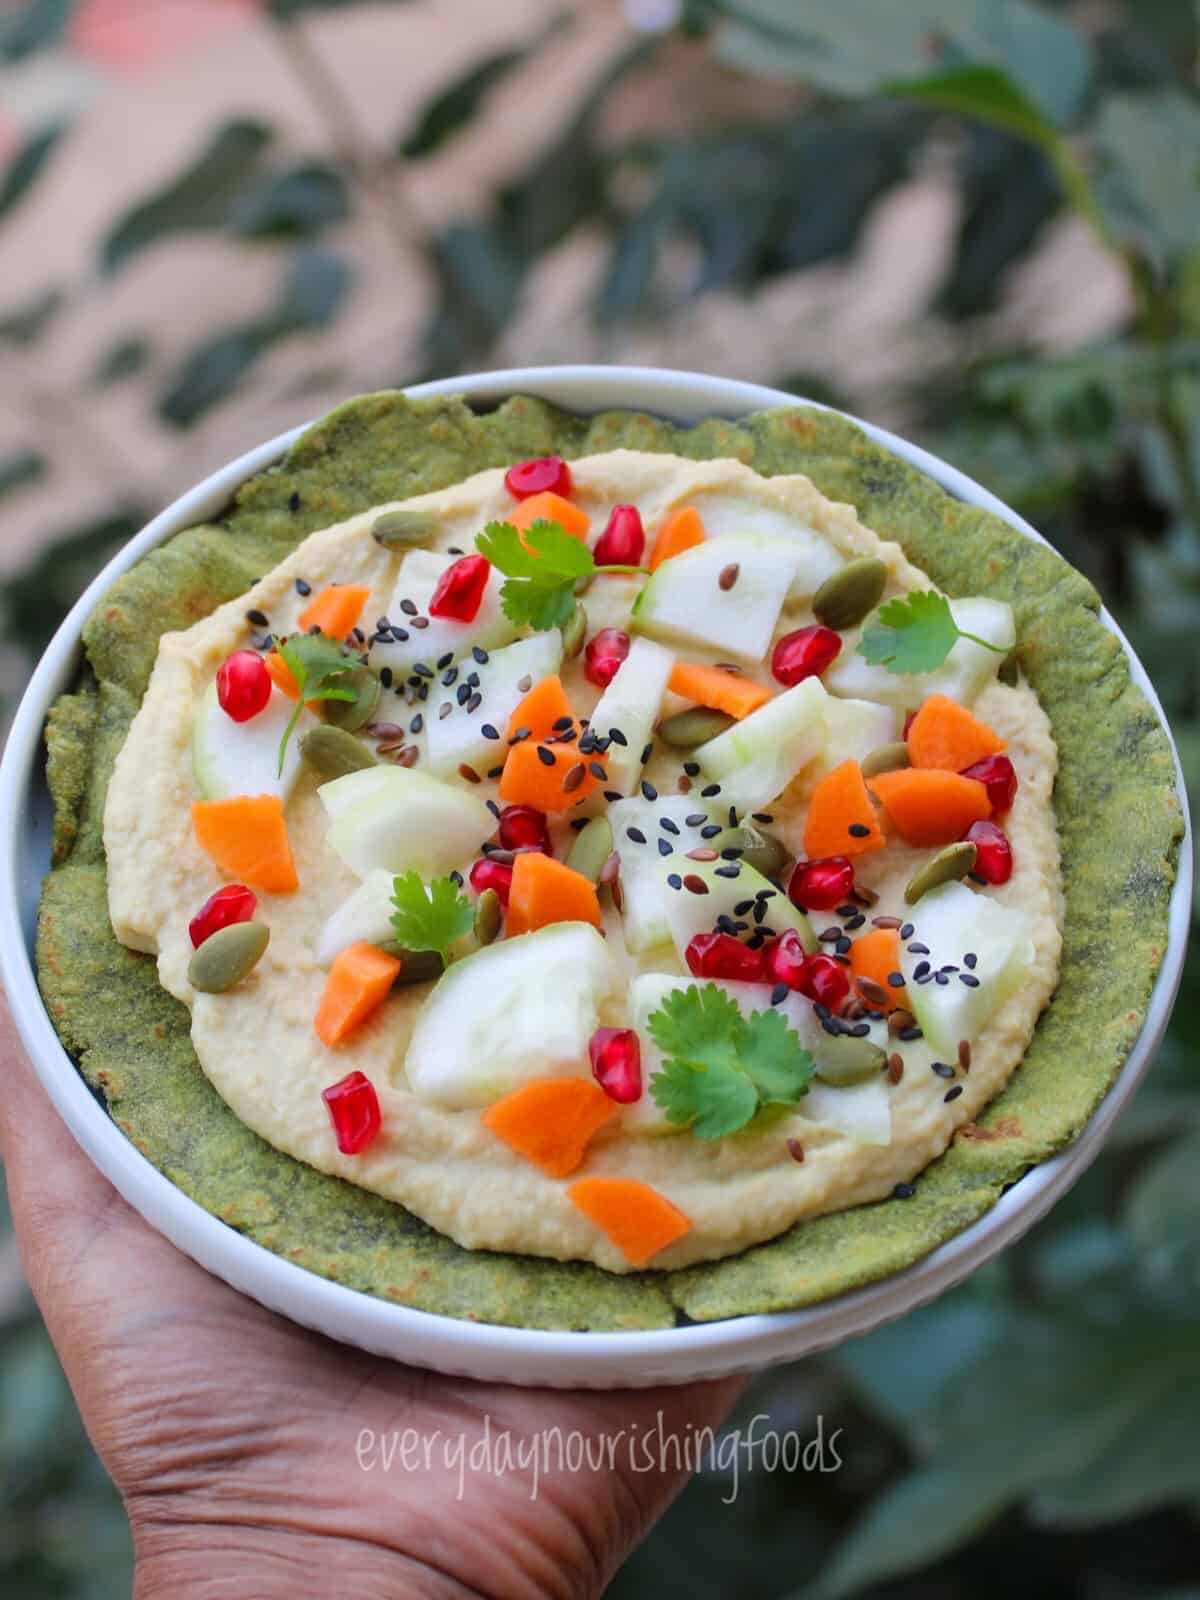 spinach tortilla with hummus and veggies